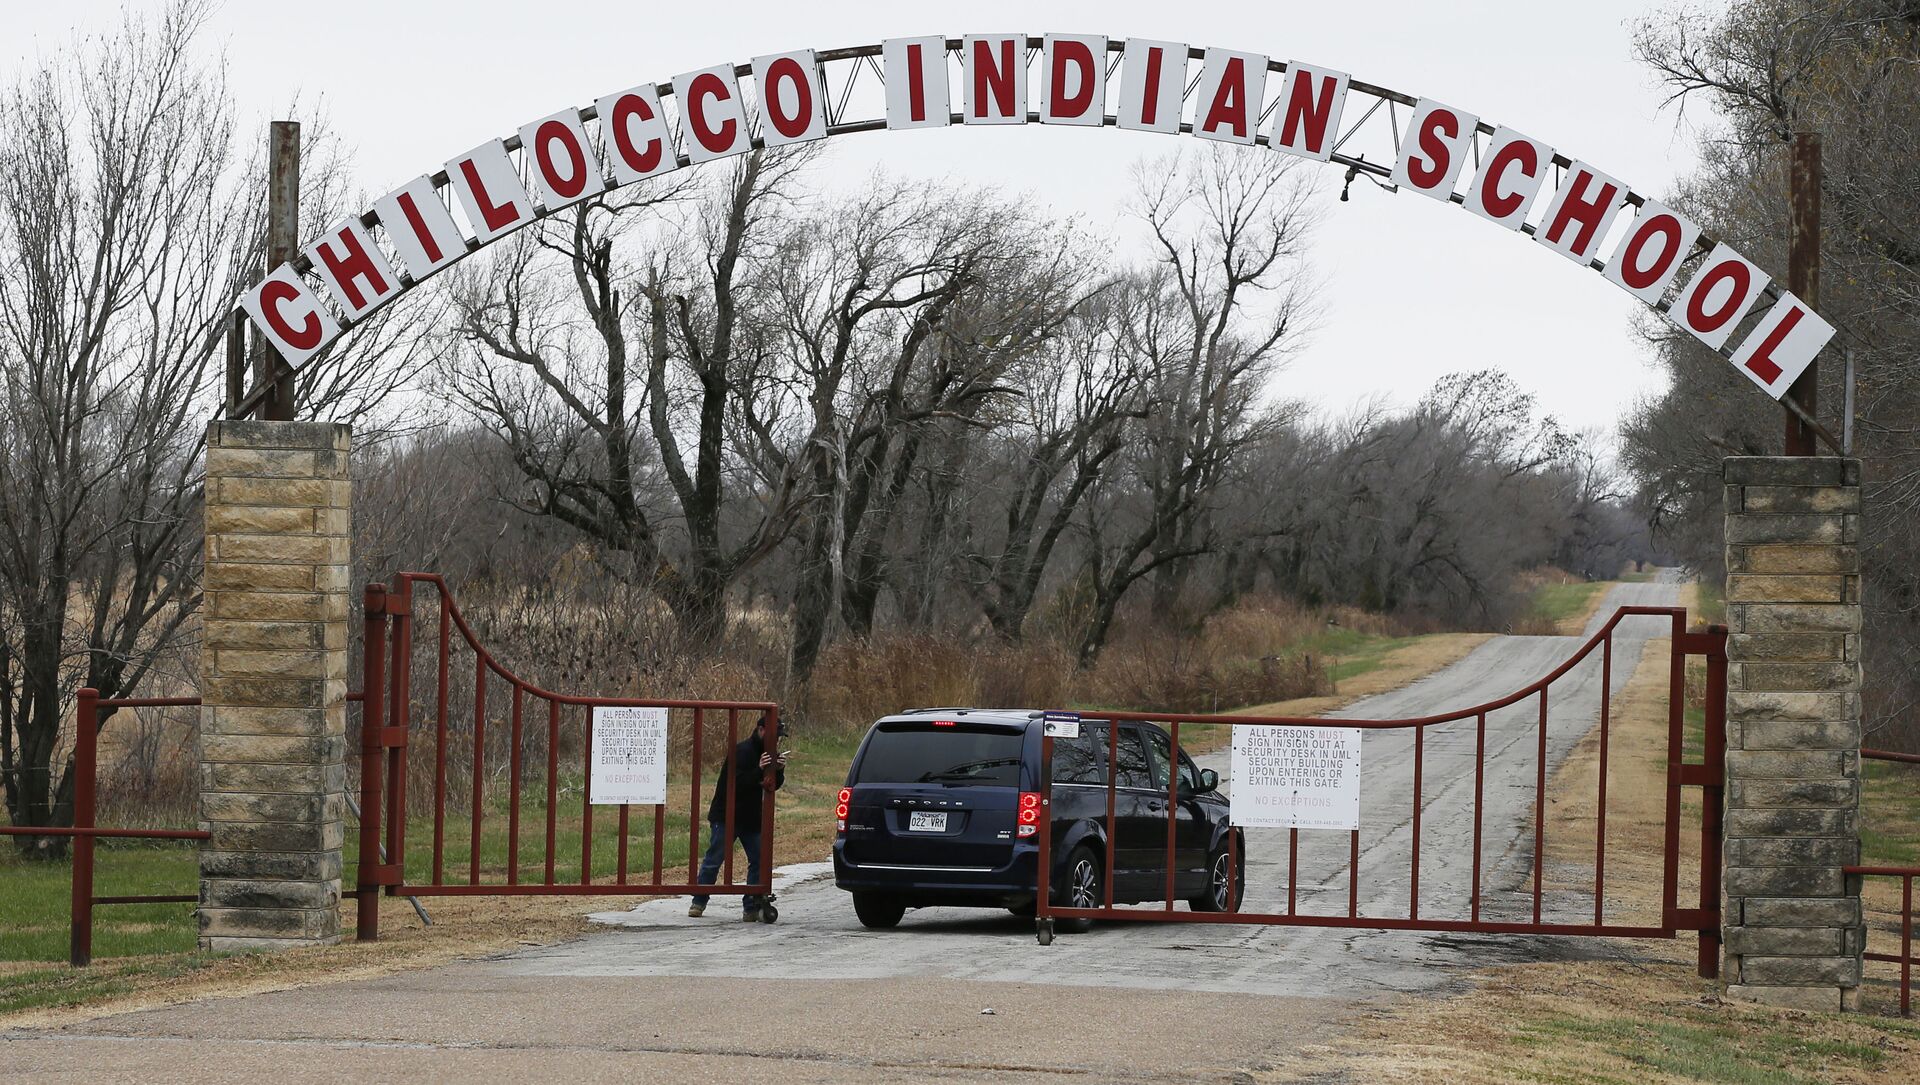 In this Wednesday, Nov. 29, 2017 file photo, a vehicle arrives at the abandoned Chilocco Indian School campus in Newkirk, Okla, Five American Indian tribes are opposing plans by the U.S. Department of Homeland Security to conduct bioterrorism drills at a tribal burial ground and abandoned boarding school, saying the agency didn't tell them that potentially dangerous substances could be used there. - Sputnik International, 1920, 22.06.2021